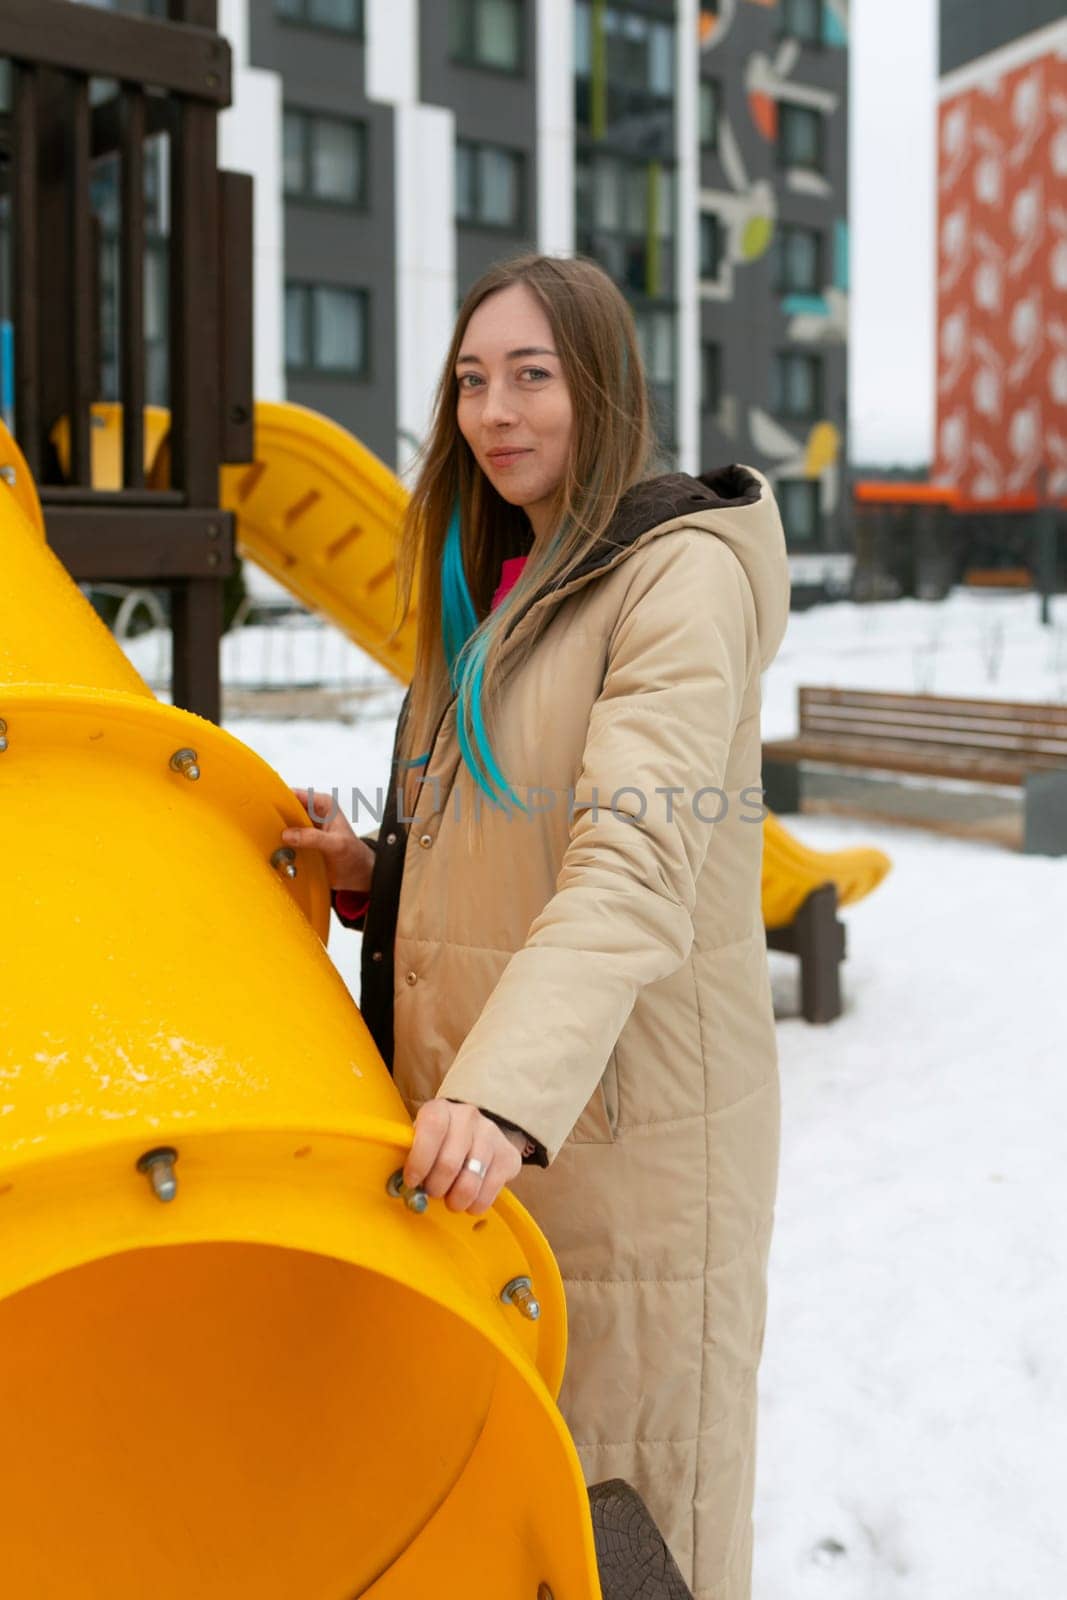 Woman Standing Next to Yellow Playground Structure by TRMK